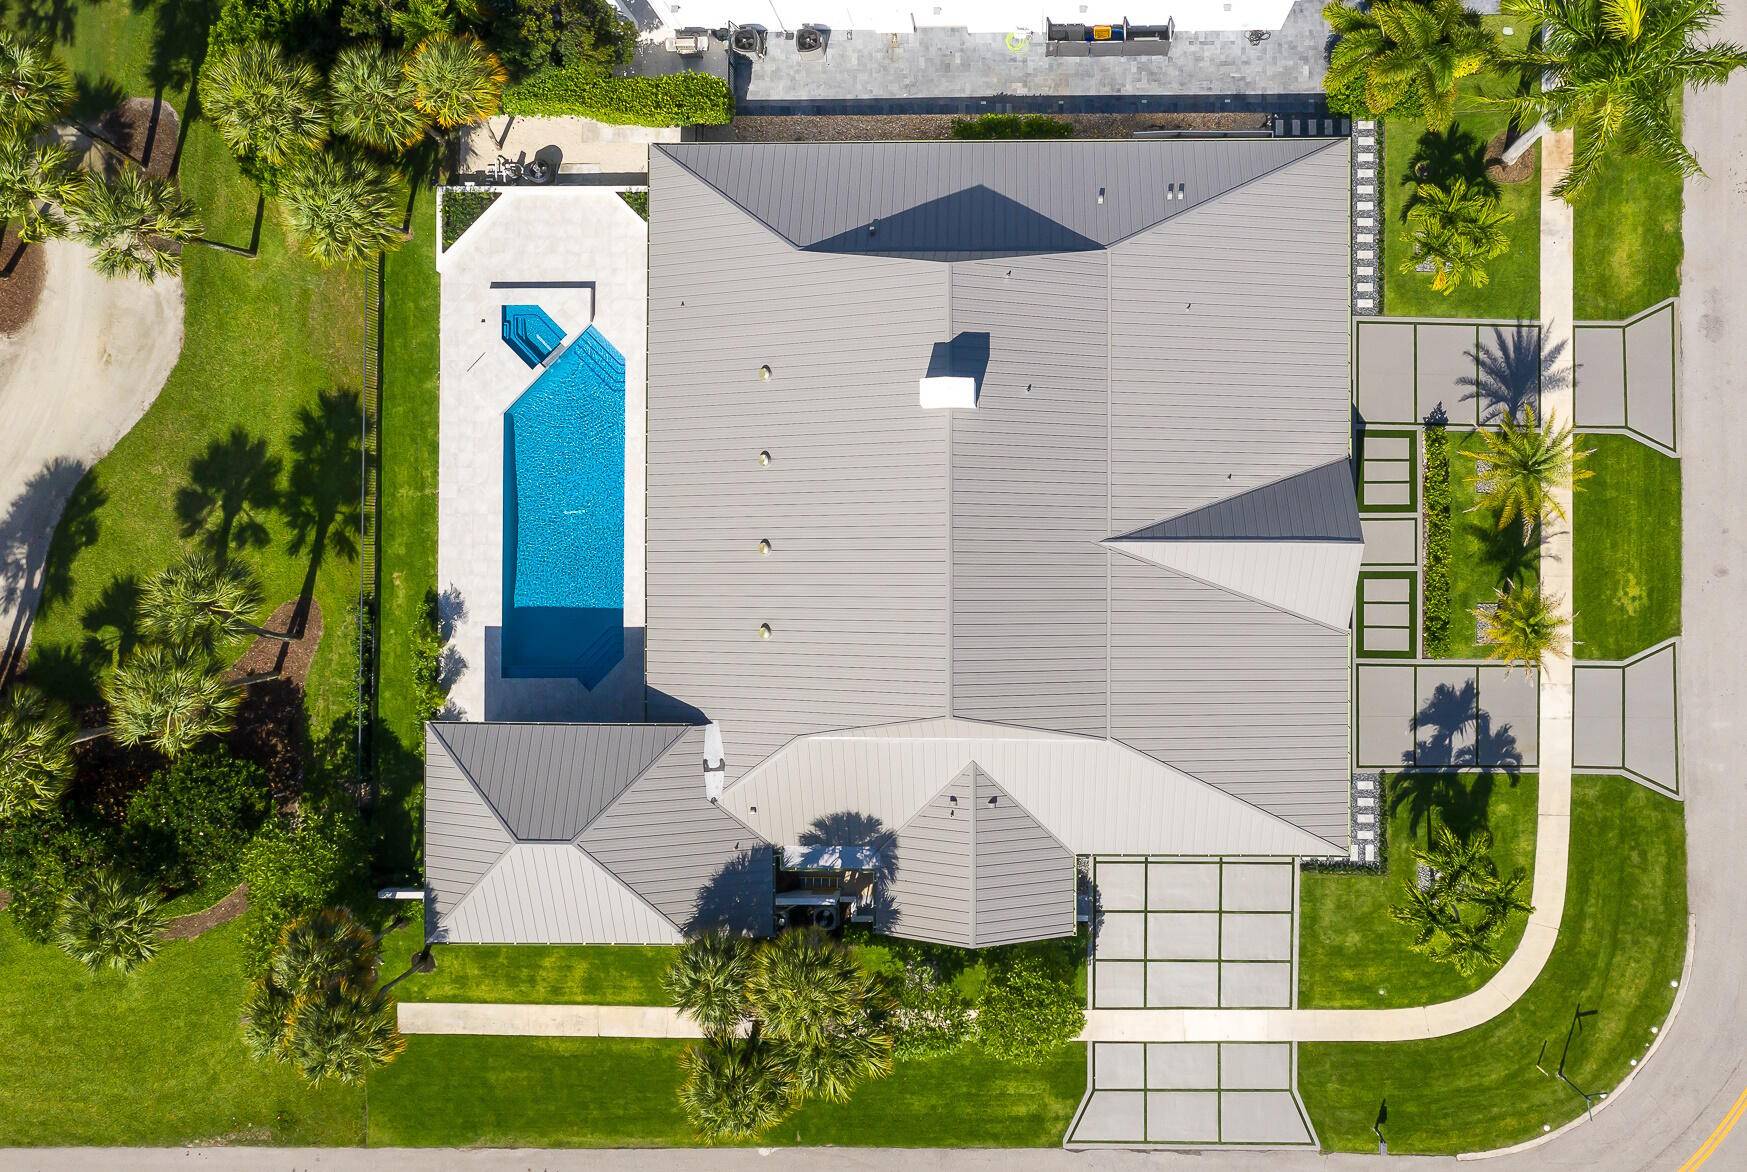 Introducing a newly renovated masterpiece, this one story residence in Delaire Country Club exudes modern luxury with over 5, 000 square feet of air conditioned space.